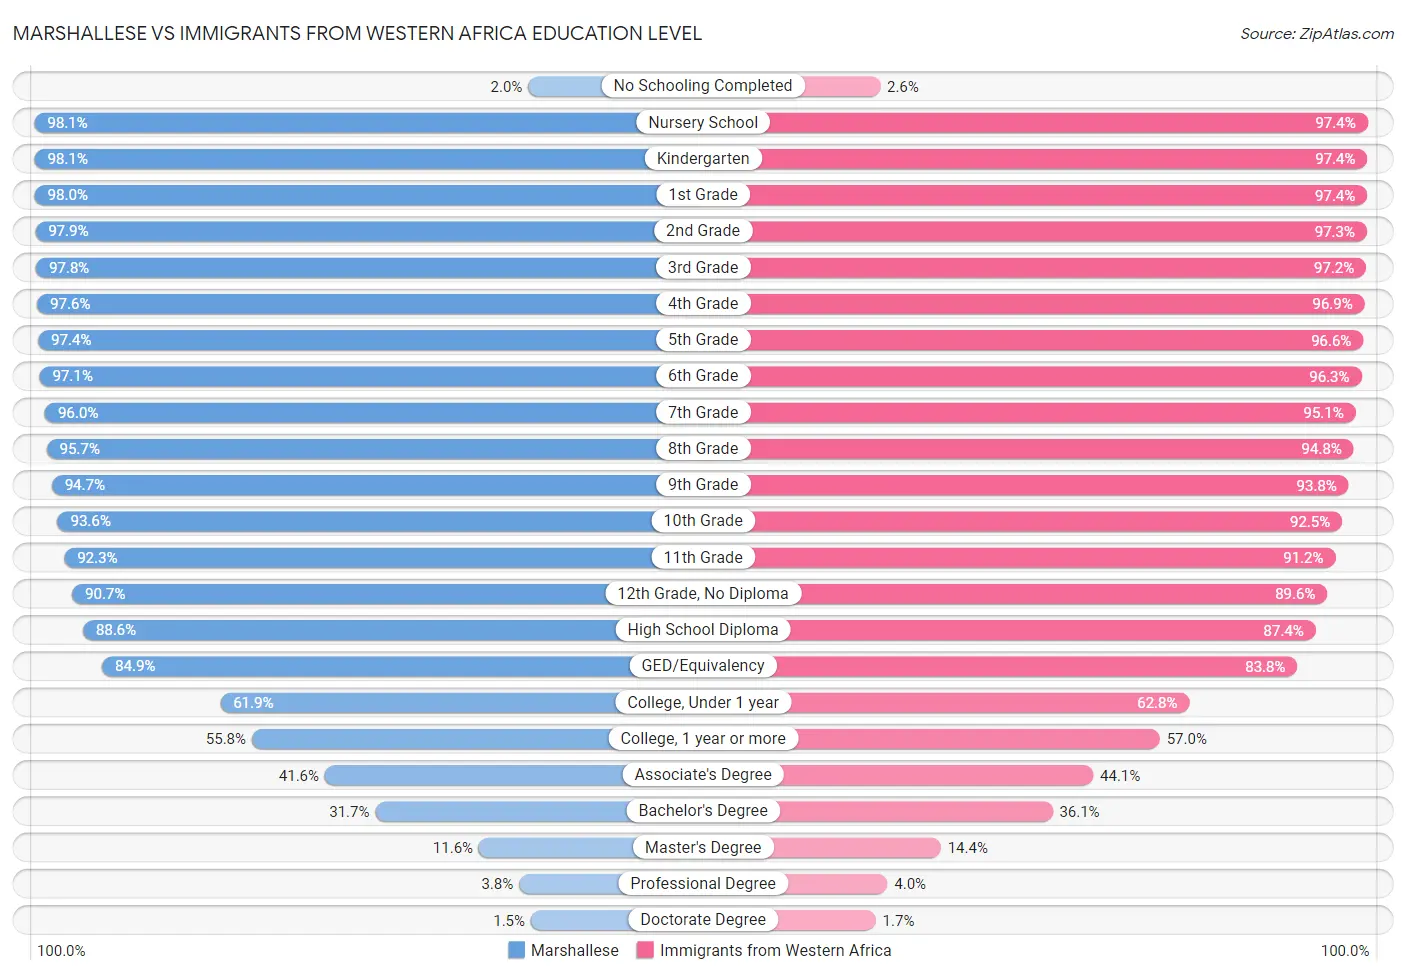 Marshallese vs Immigrants from Western Africa Education Level